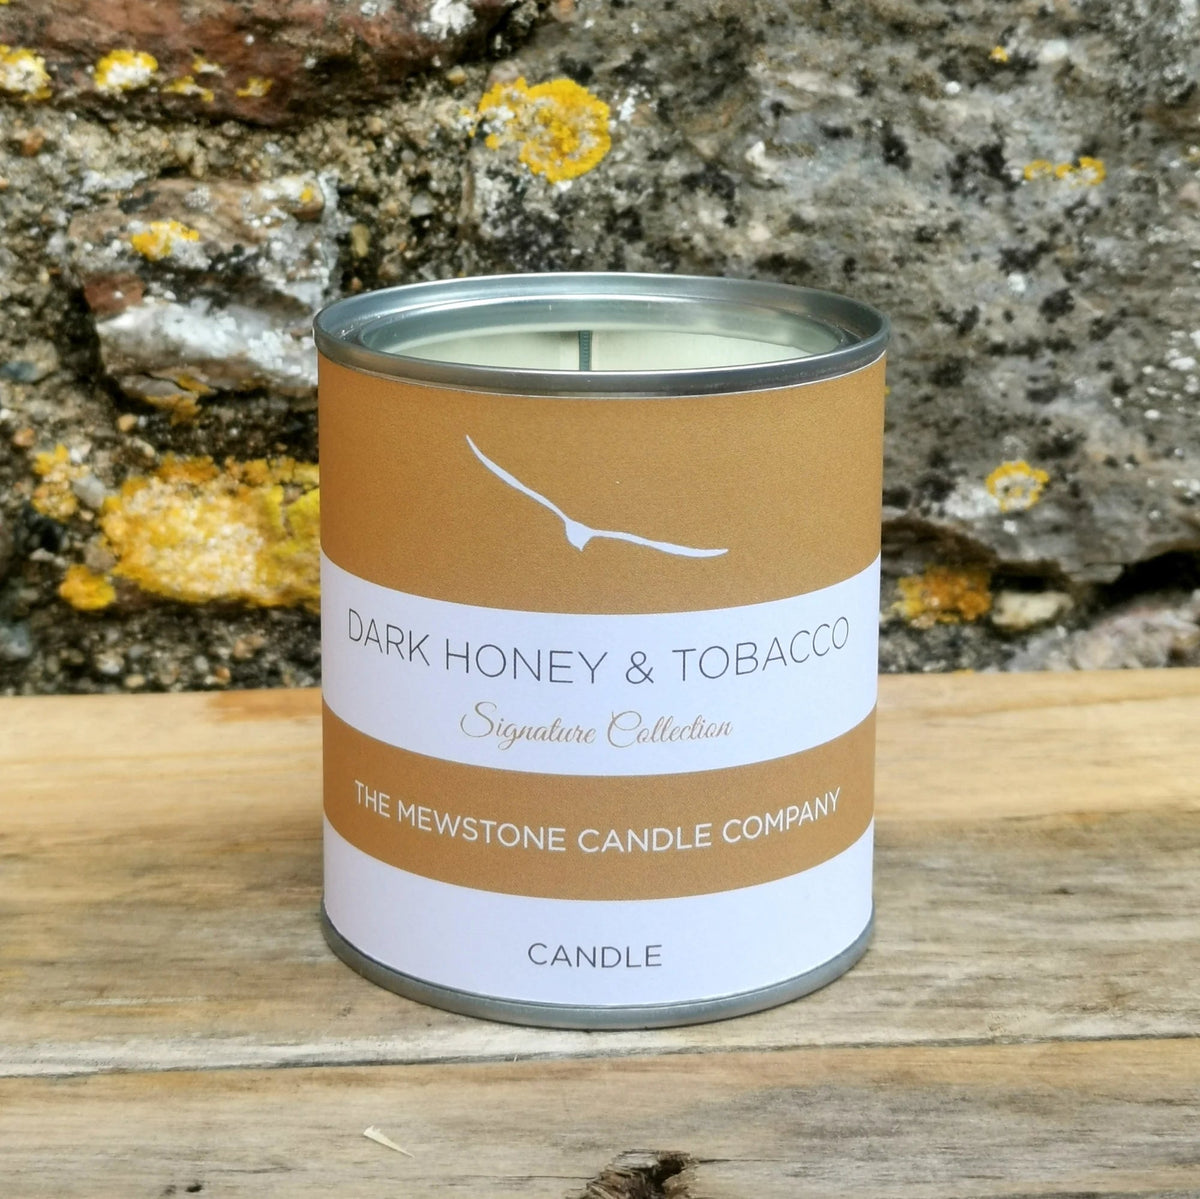 Dark Honey and Tobacco Signature Candle - The Mewstone Candle Co